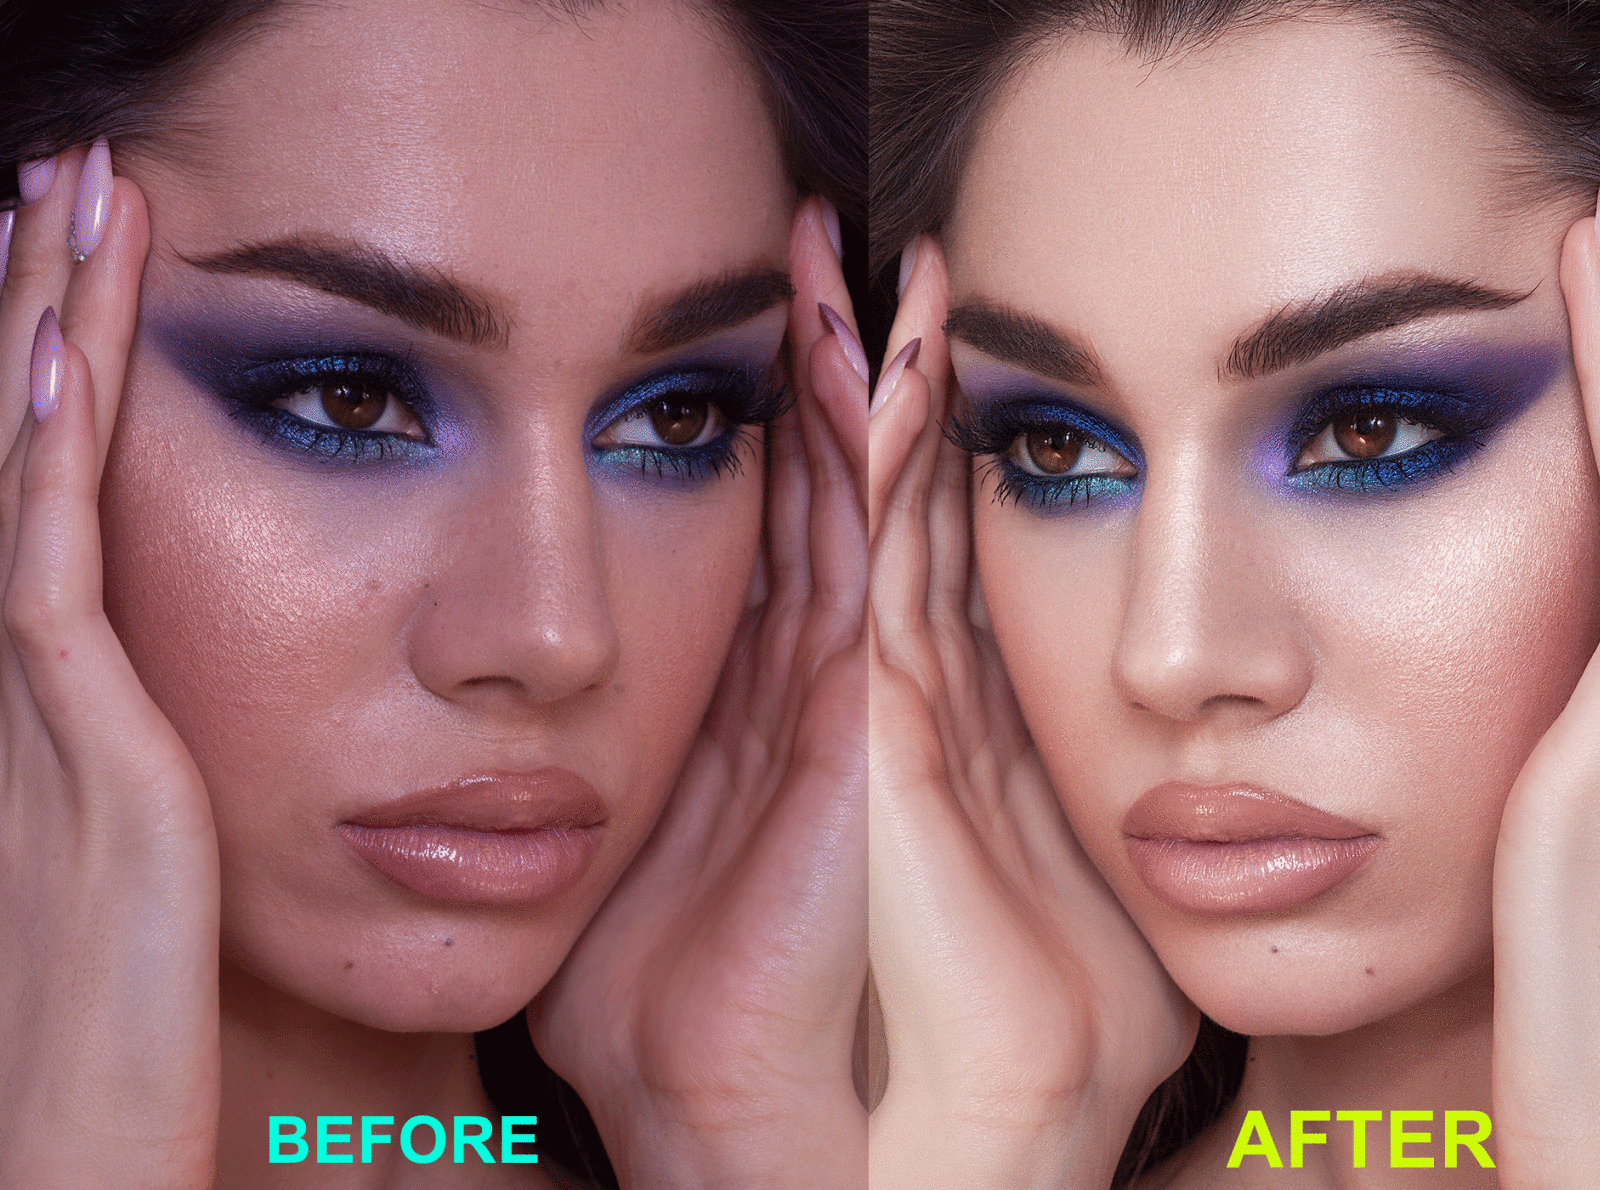 Retouching services professionally background removal cropping illustration photoshop product photo editing remove background resizing transparent white background